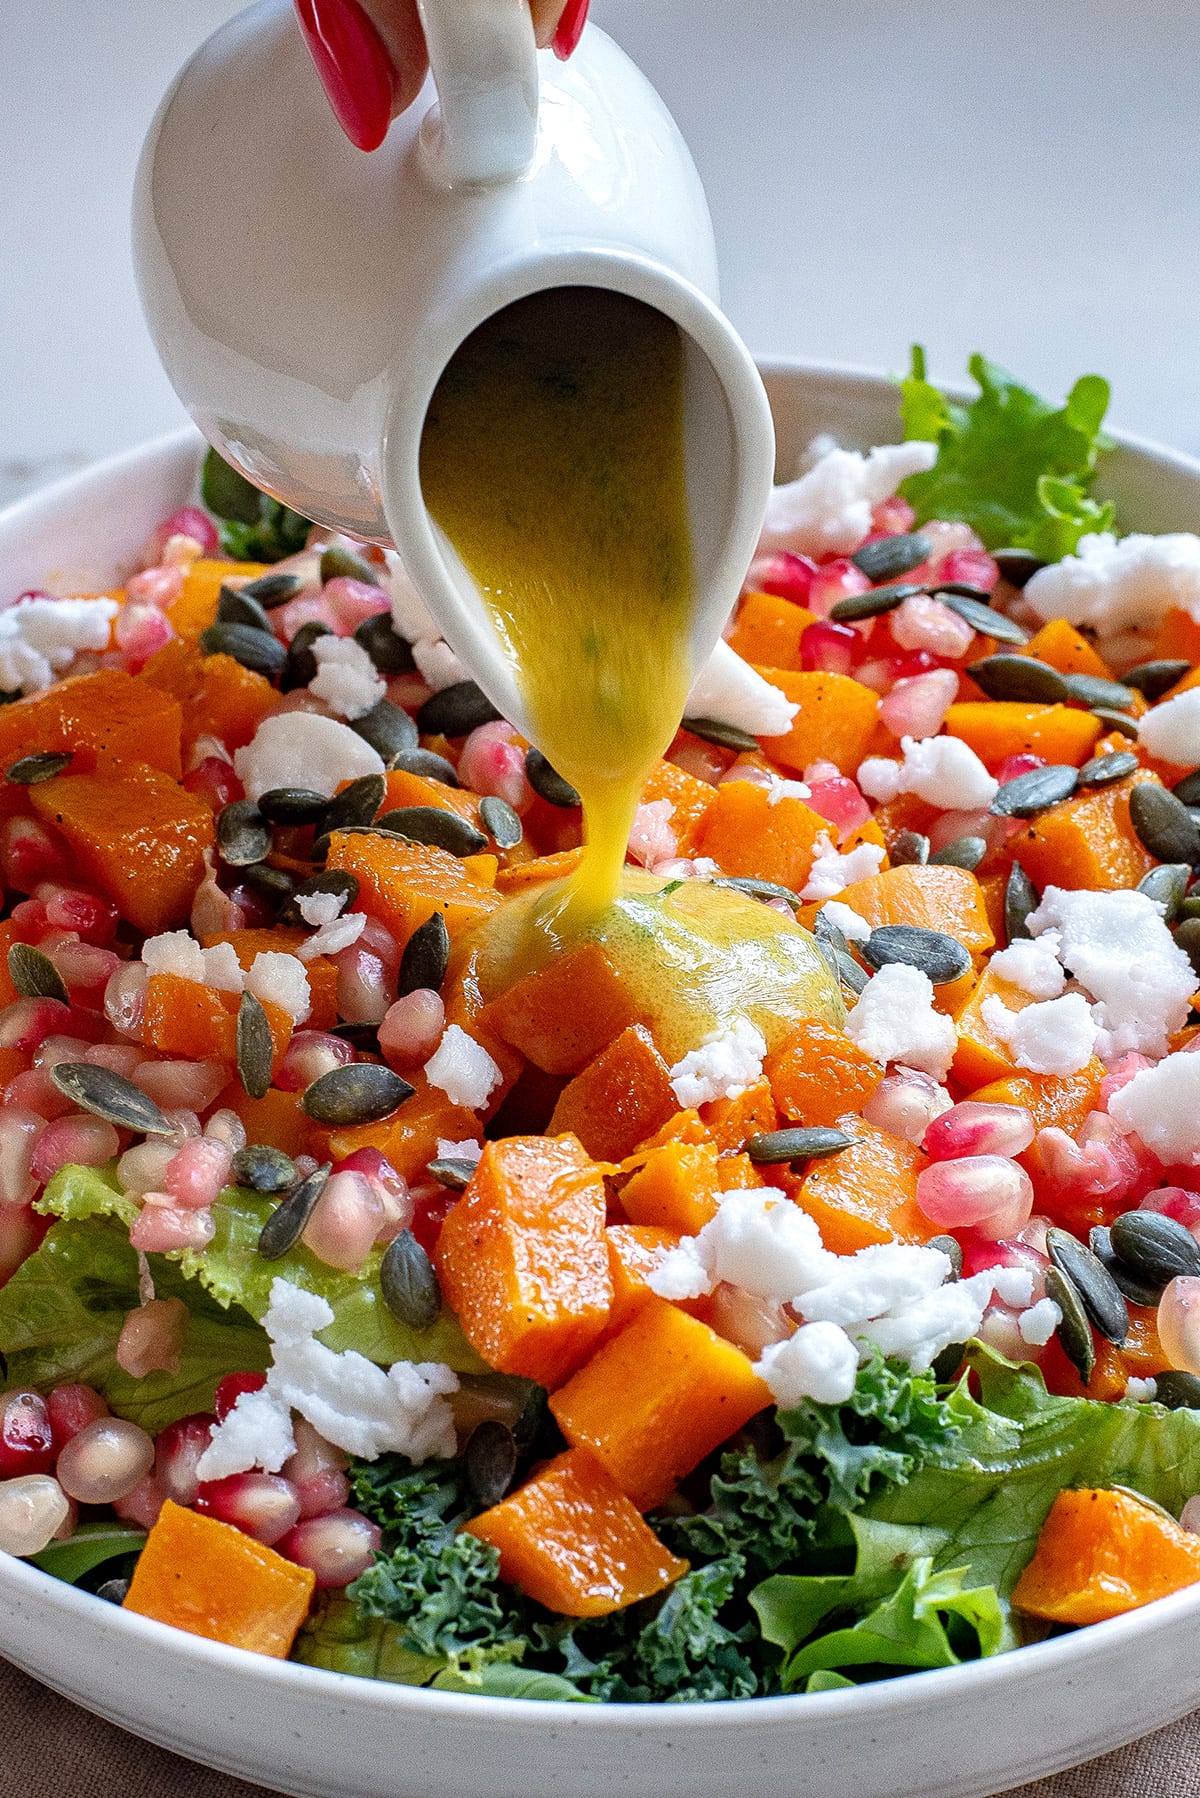 Pomegranate salad with butternut squash with the dressing being poured over the top.